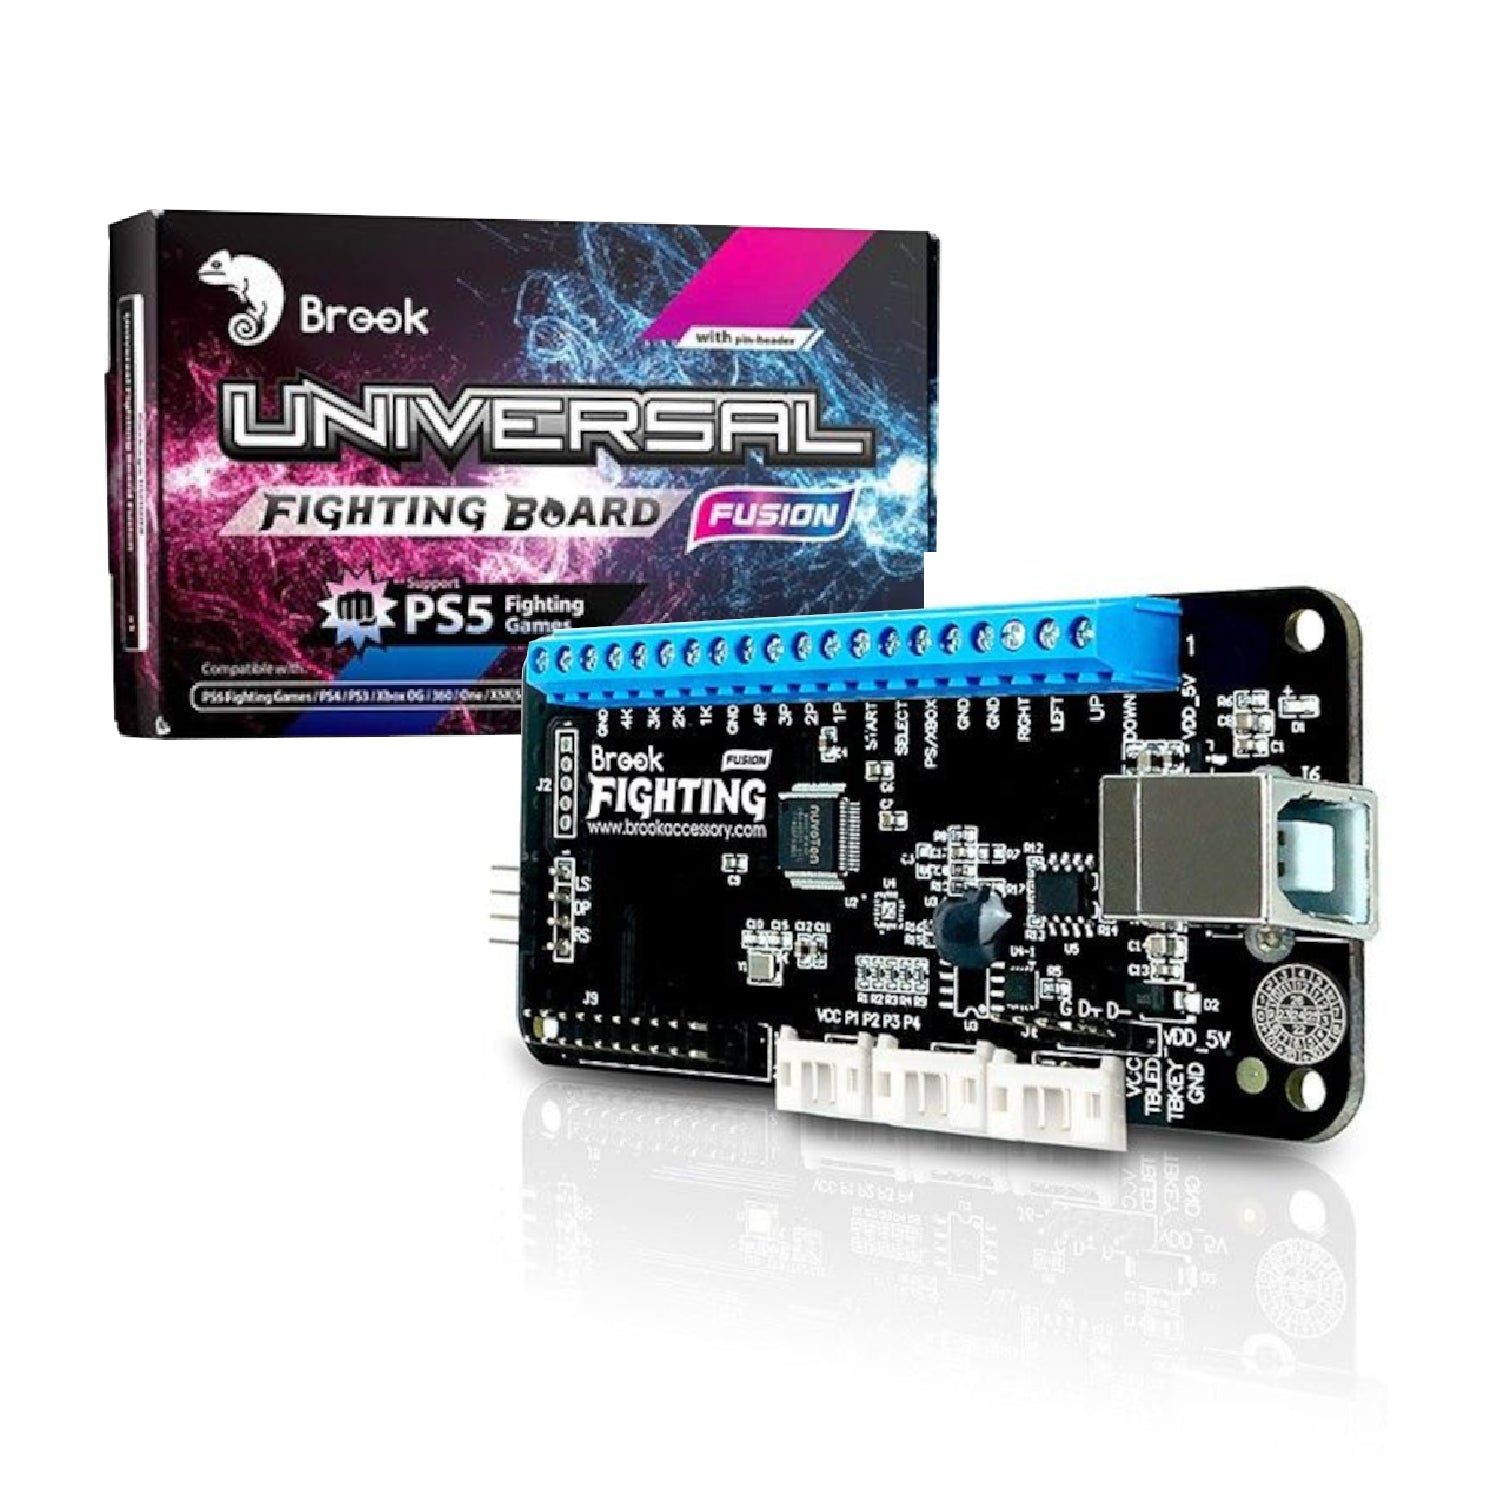 Gaming-Brook UFB Universal Fighting Board Fusion with Pin-Header (2nd Edition Upgrade) (EMM0011034)